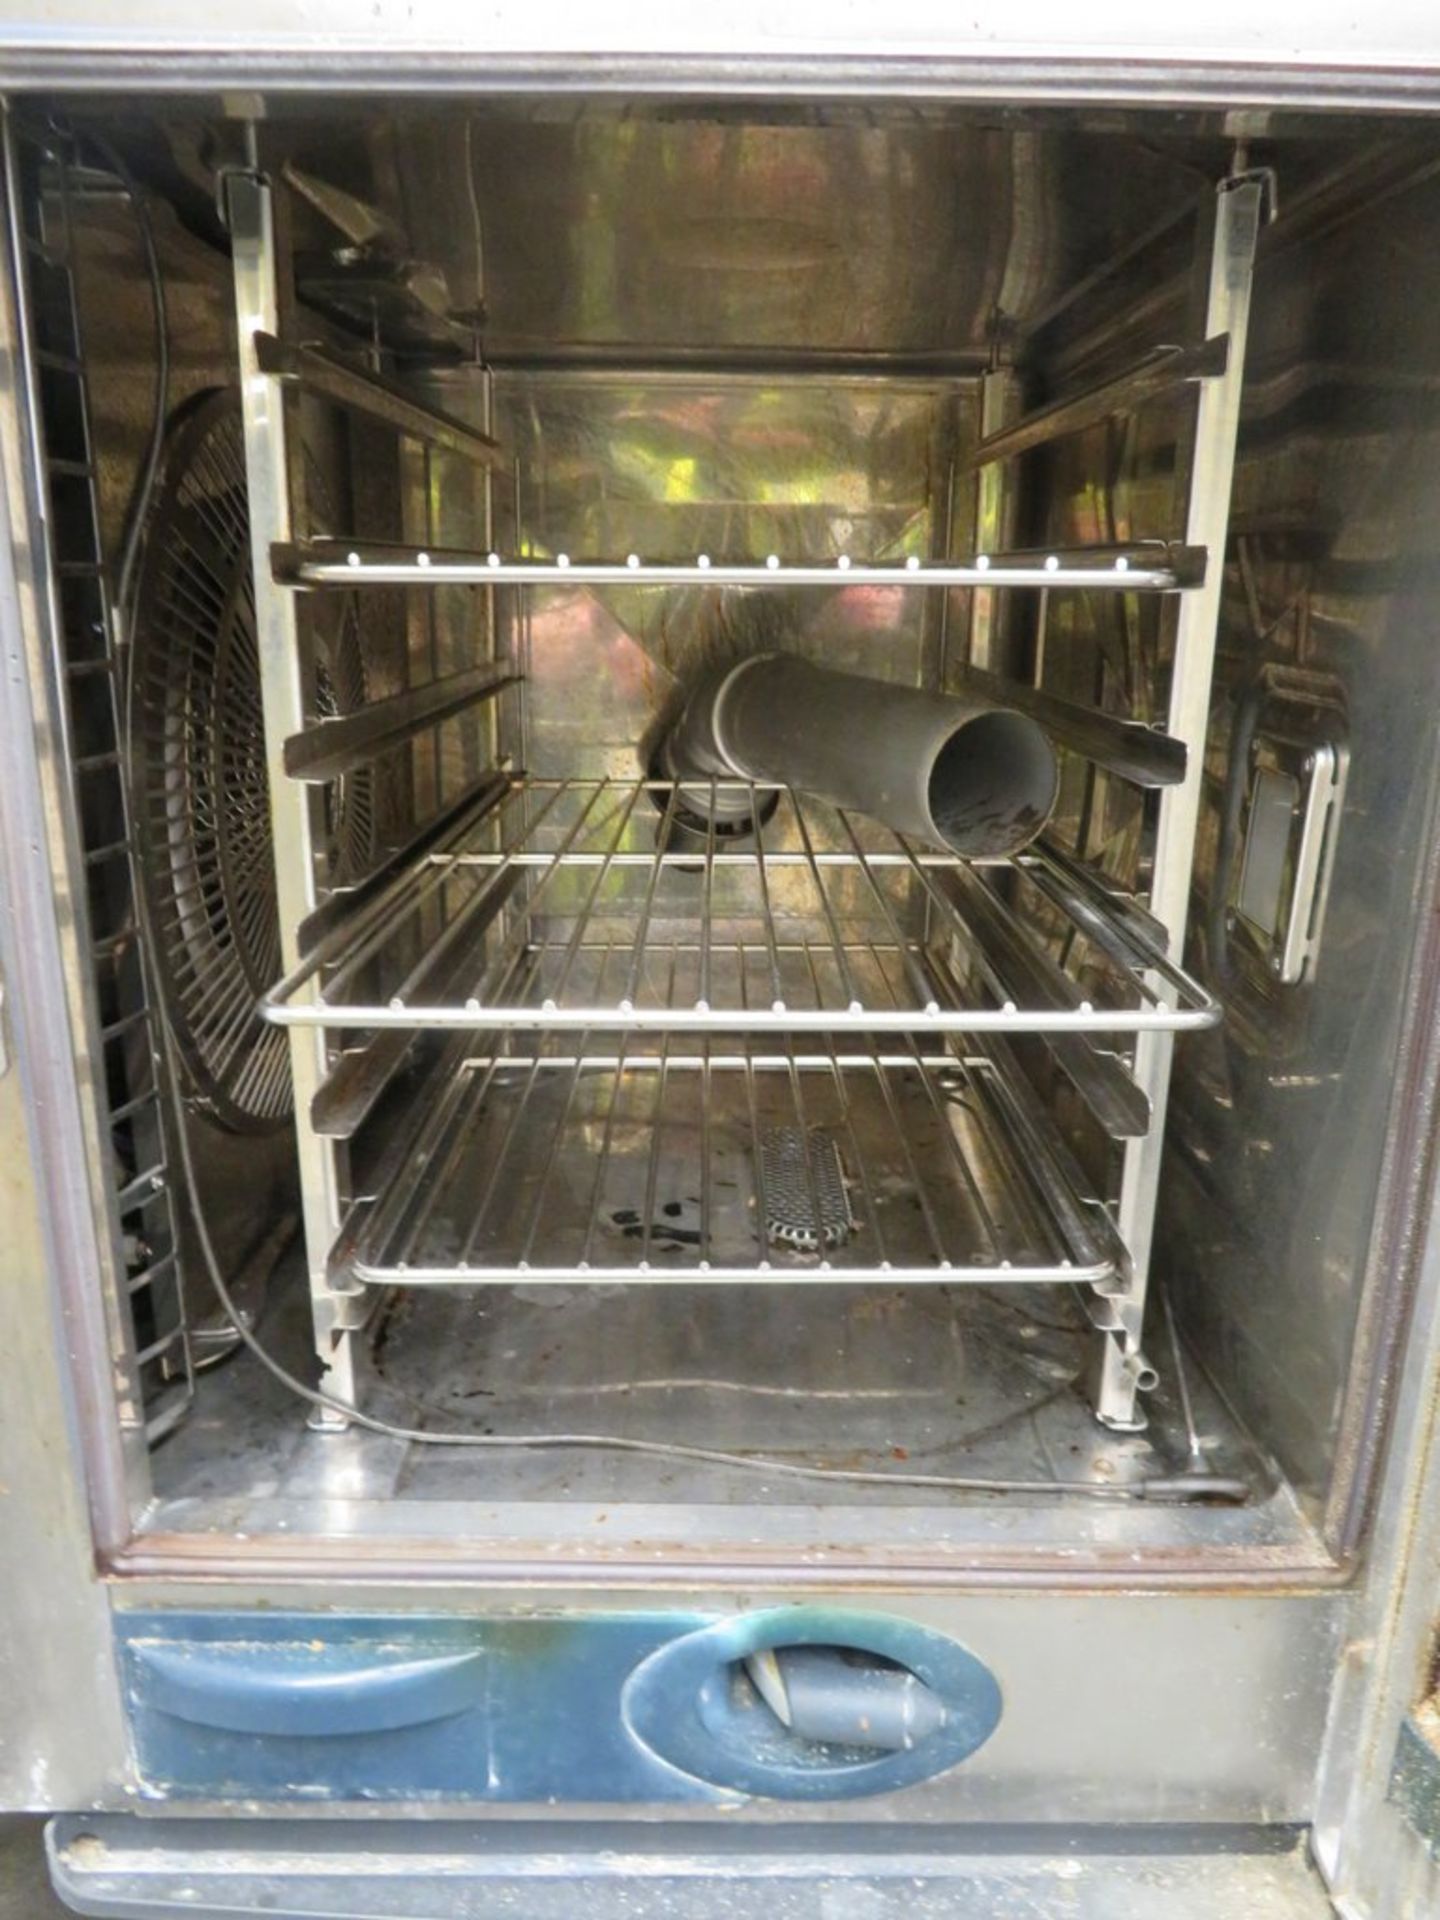 Rational SCC WE 61 6 grid combi oven, 3 phase electric - Image 5 of 9